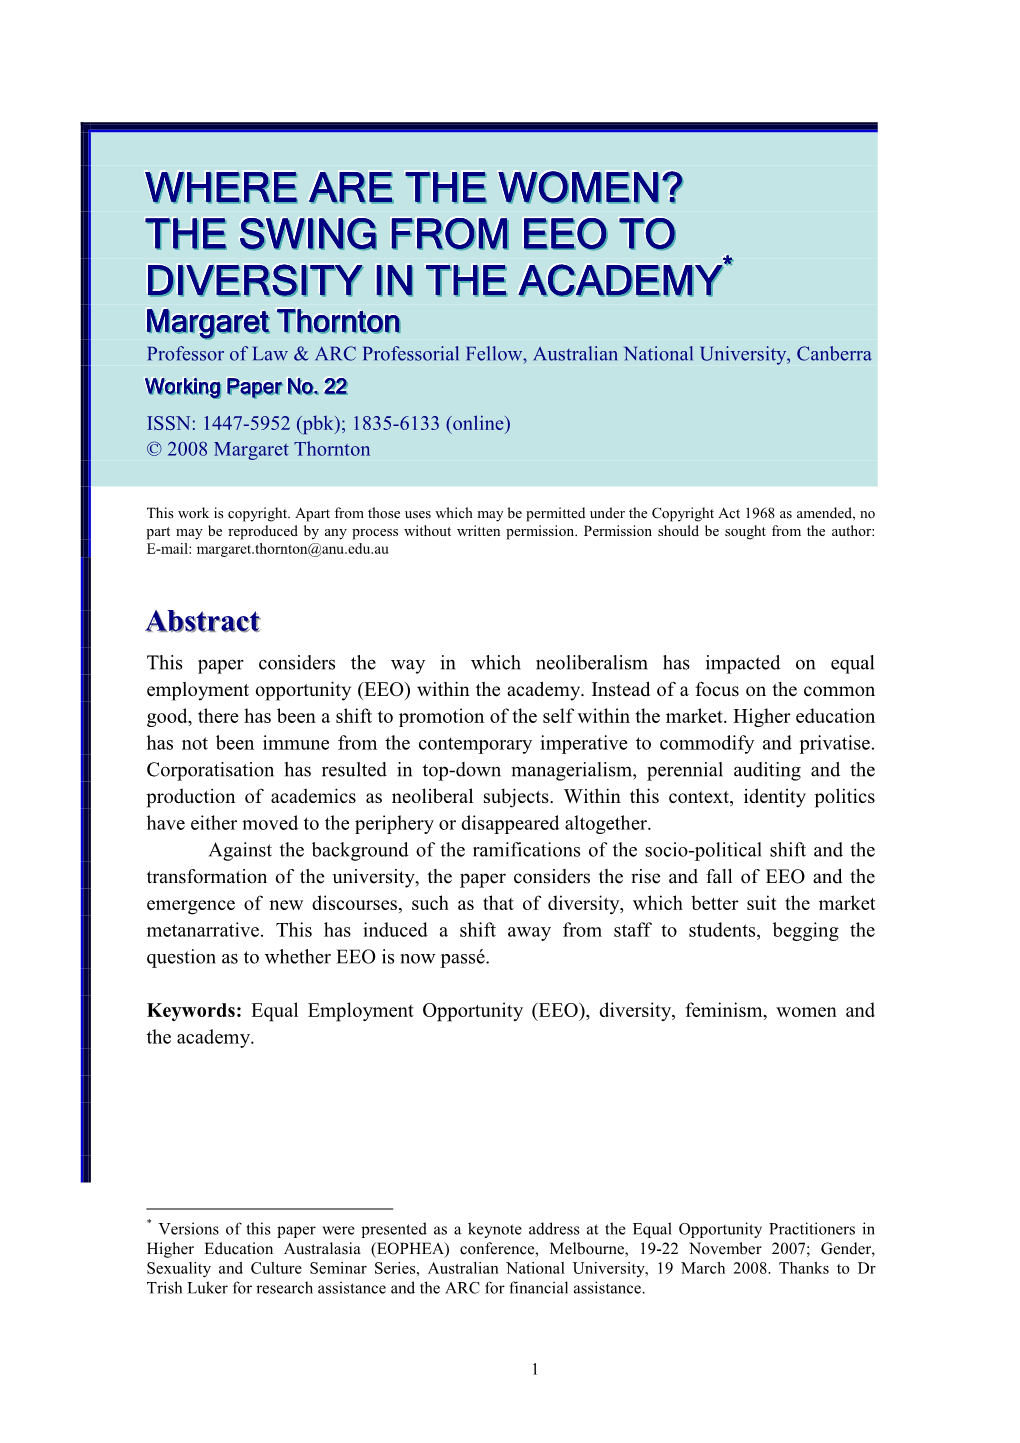 The Swing from Eeo to Diversity in the Academy